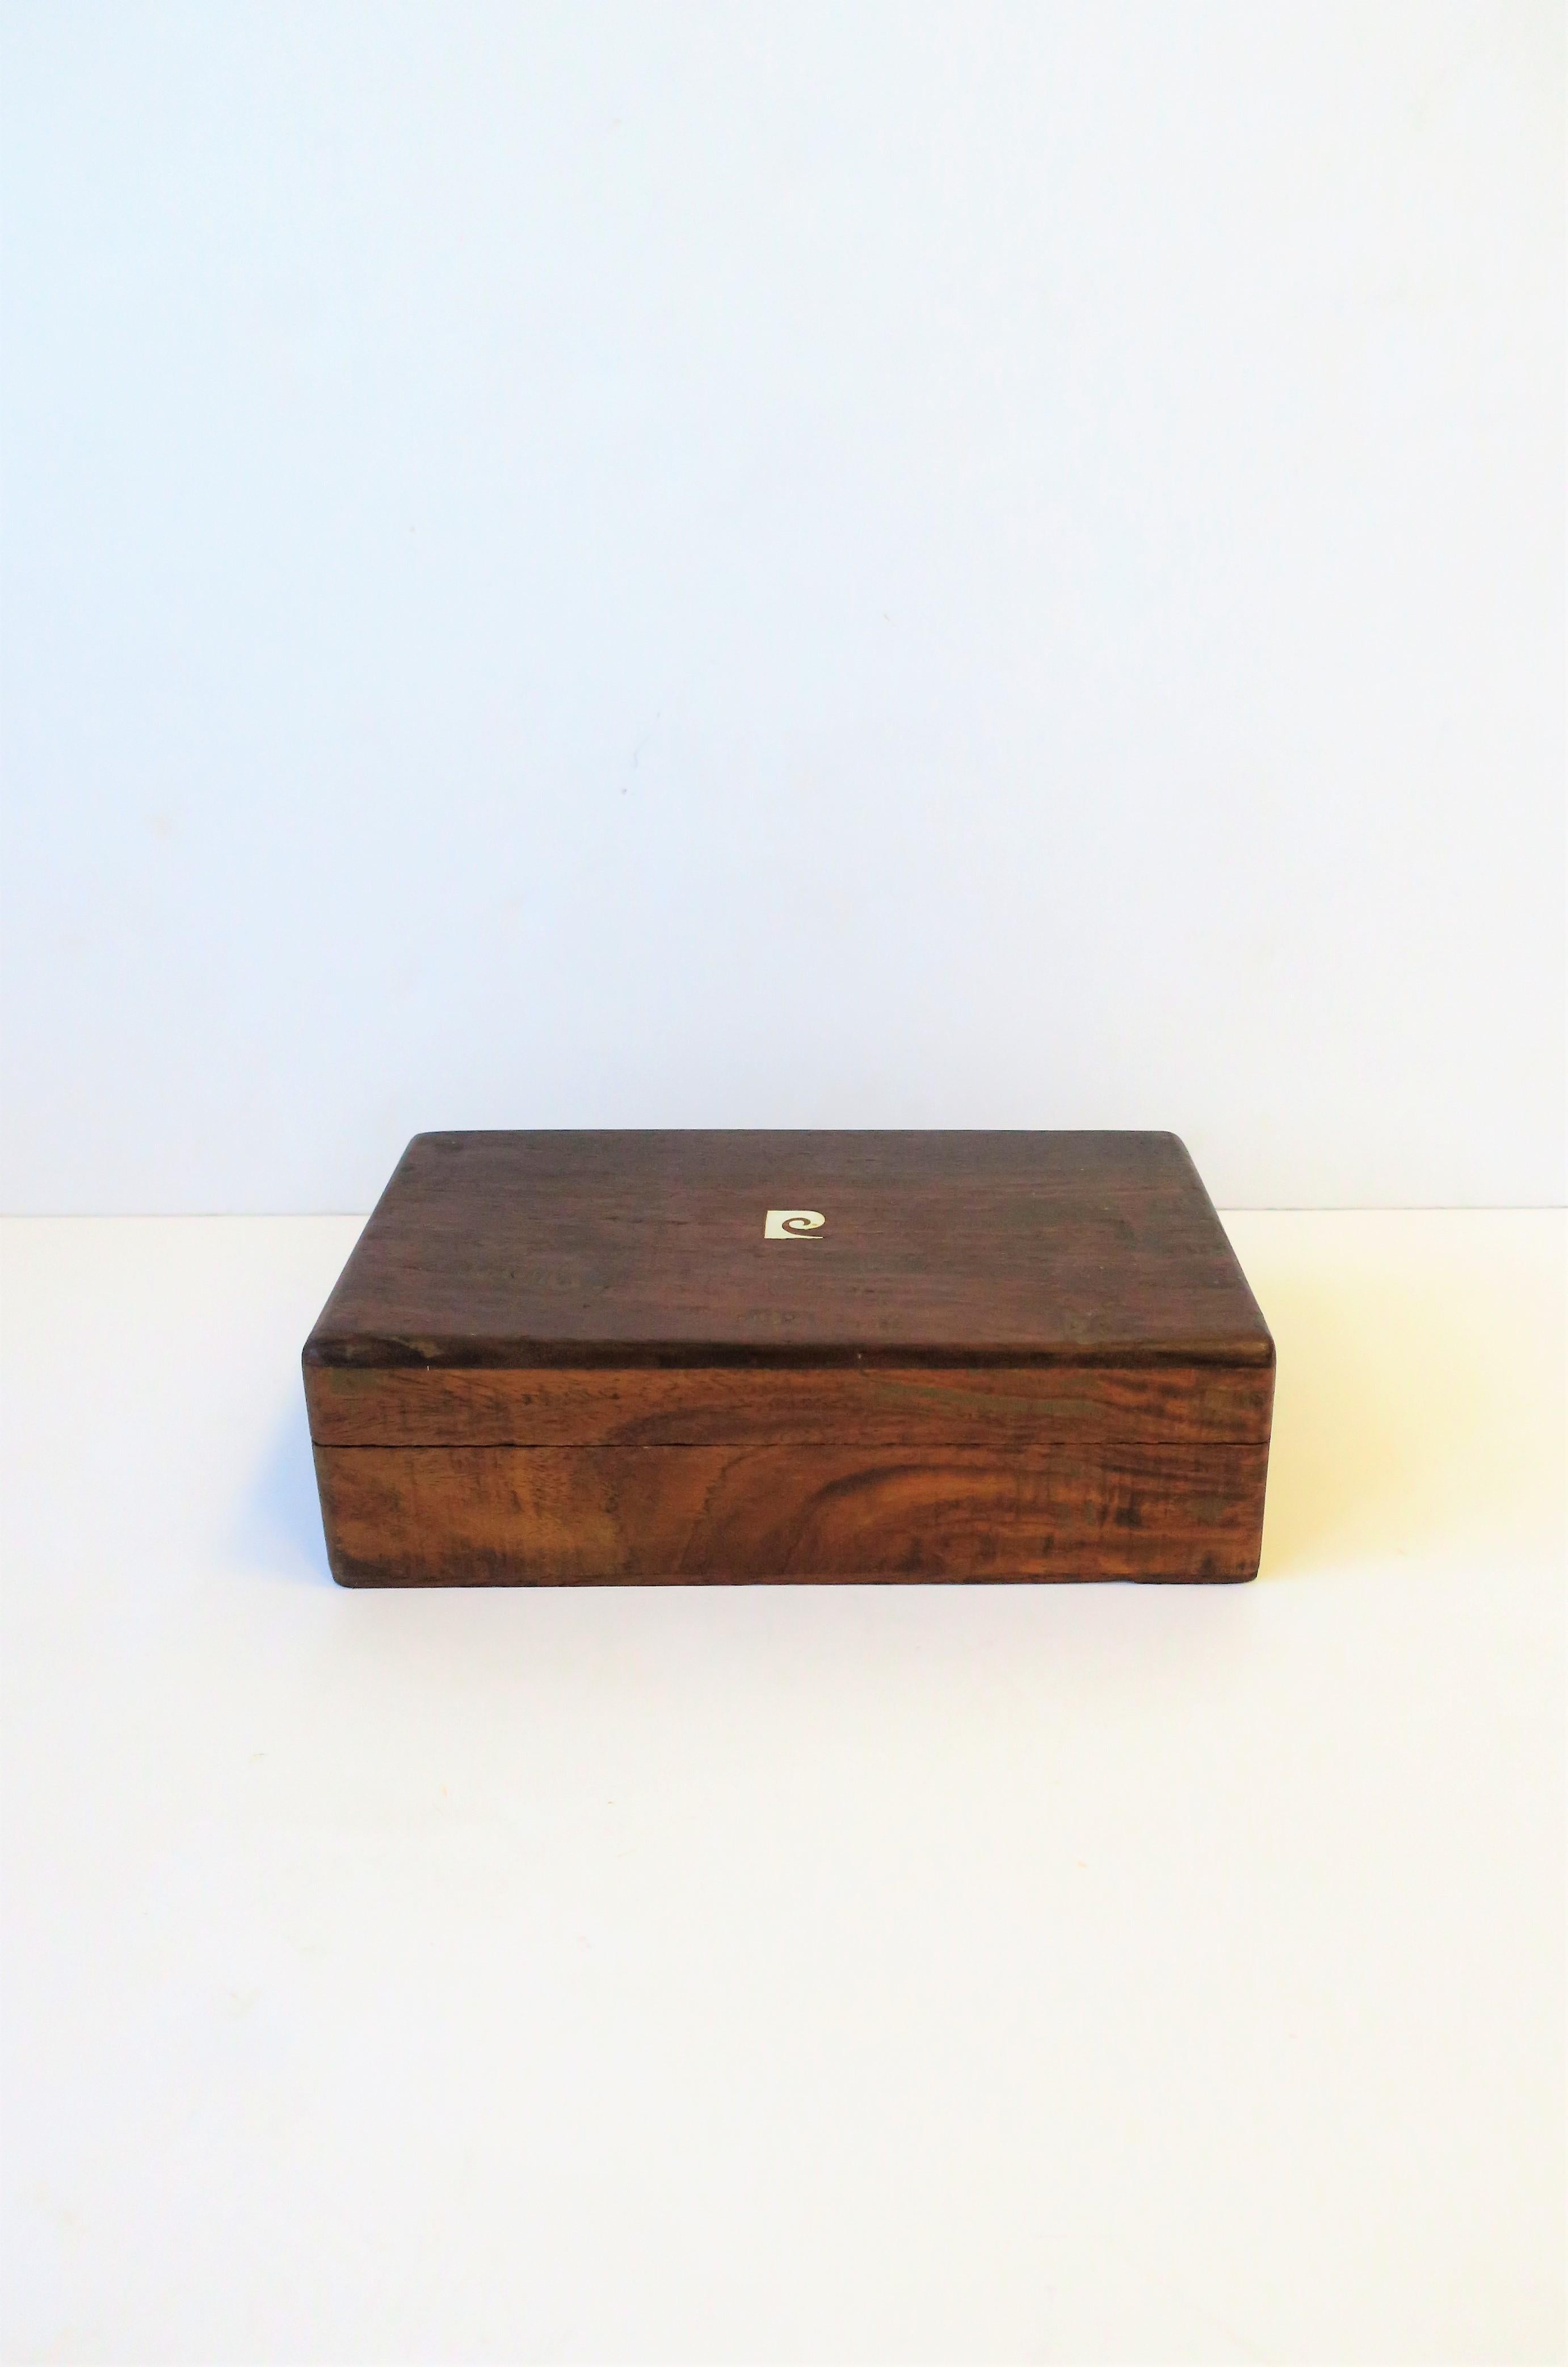 A 1970s modern (or Postmodern) Pierre Cardin wood jewelry box or catchall box. Iconic Pierre Cardin logo on top.
Box measures: 6